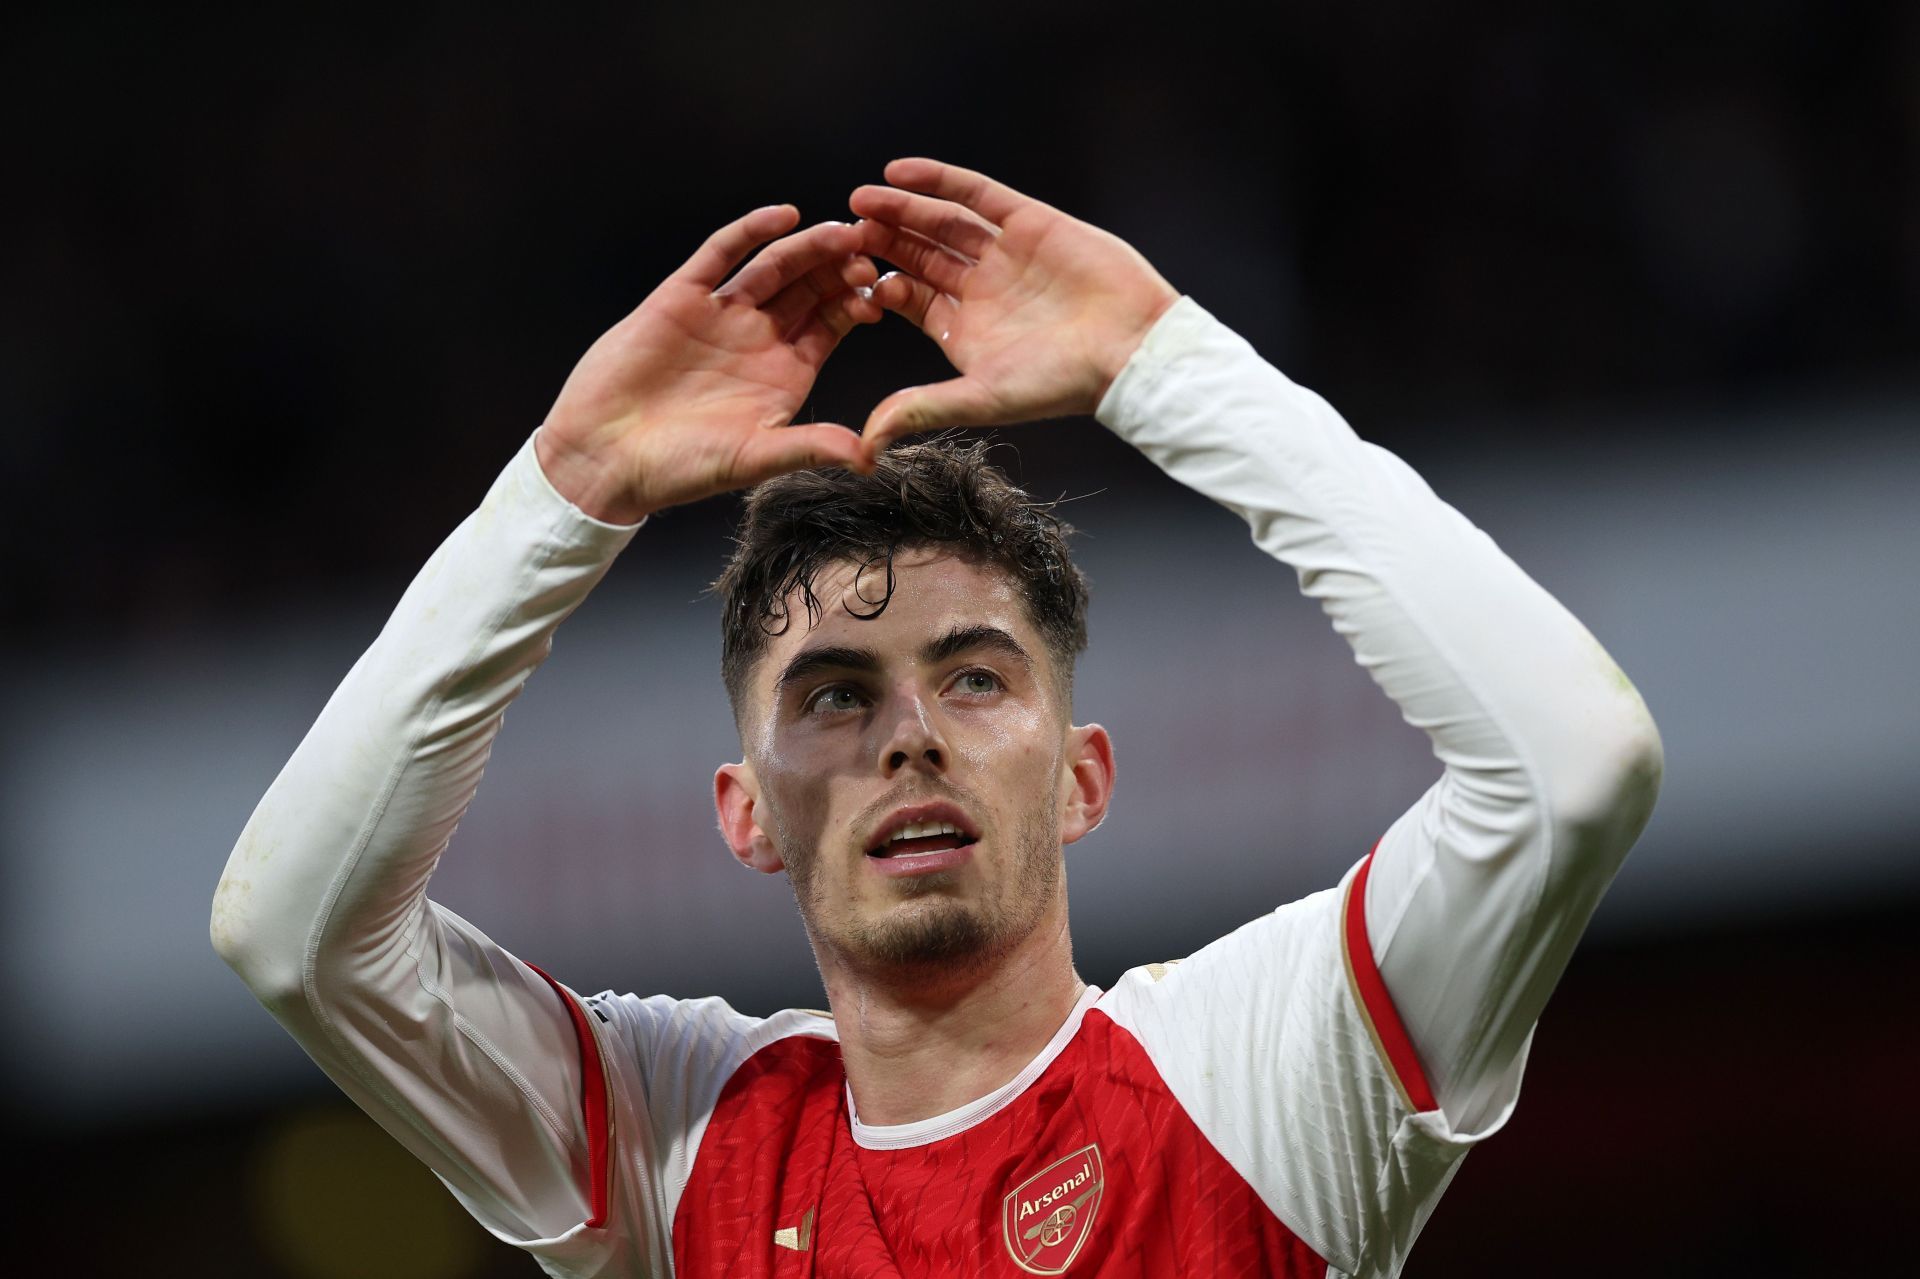 Kai Havertz has started to build a strong connection with Arsenal fans.